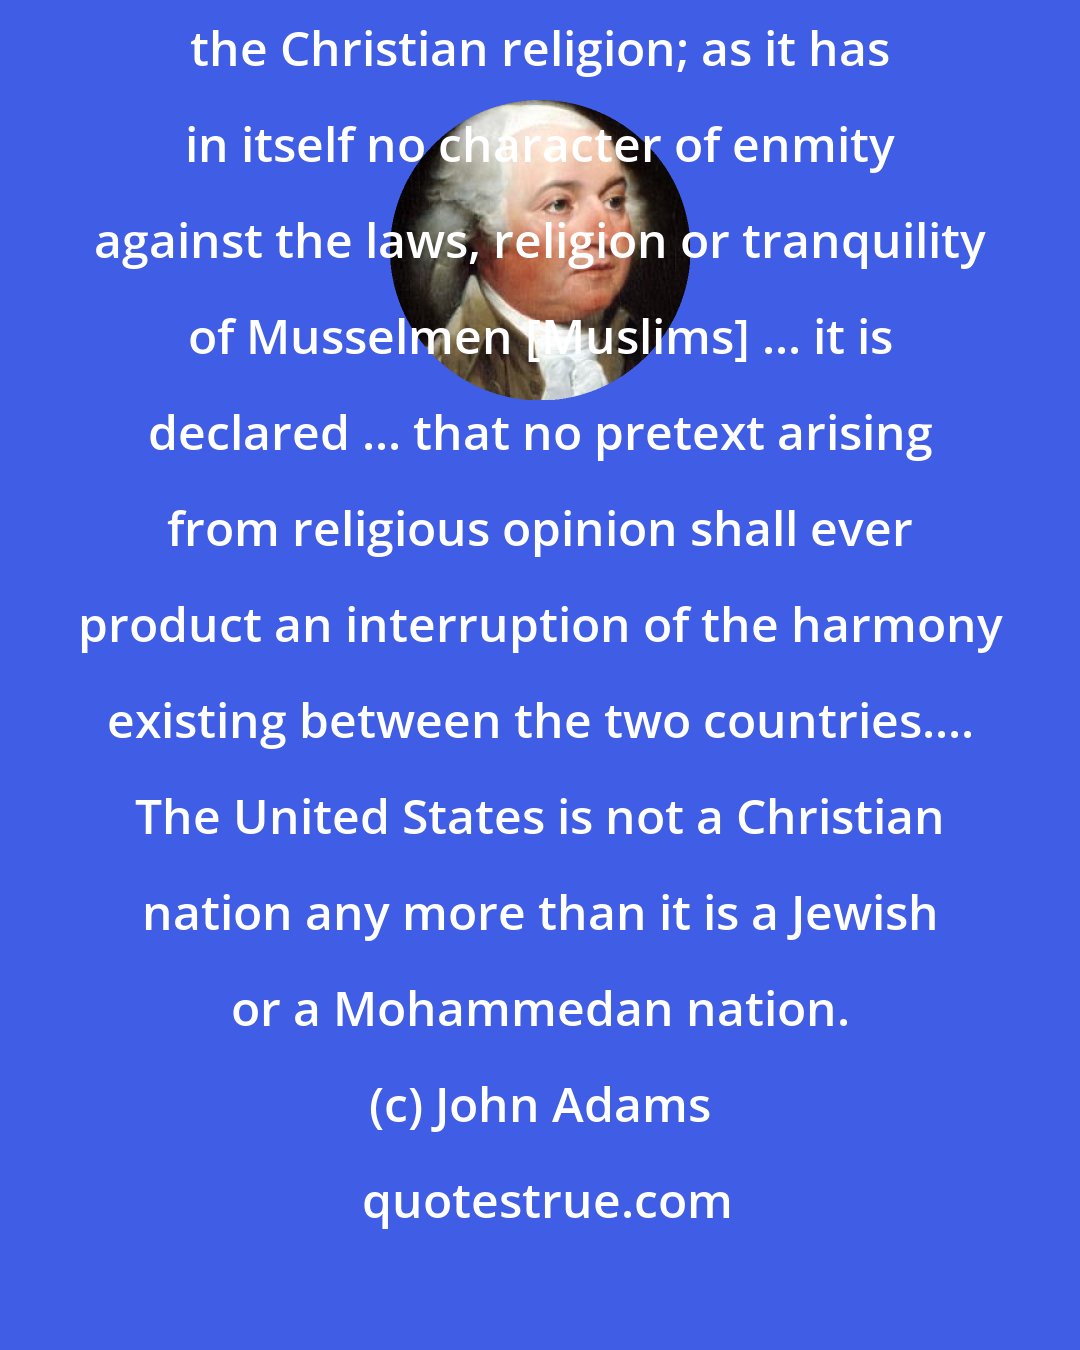 John Adams: As the government of the United States is not, in any sense, founded on the Christian religion; as it has in itself no character of enmity against the laws, religion or tranquility of Musselmen [Muslims] ... it is declared ... that no pretext arising from religious opinion shall ever product an interruption of the harmony existing between the two countries.... The United States is not a Christian nation any more than it is a Jewish or a Mohammedan nation.